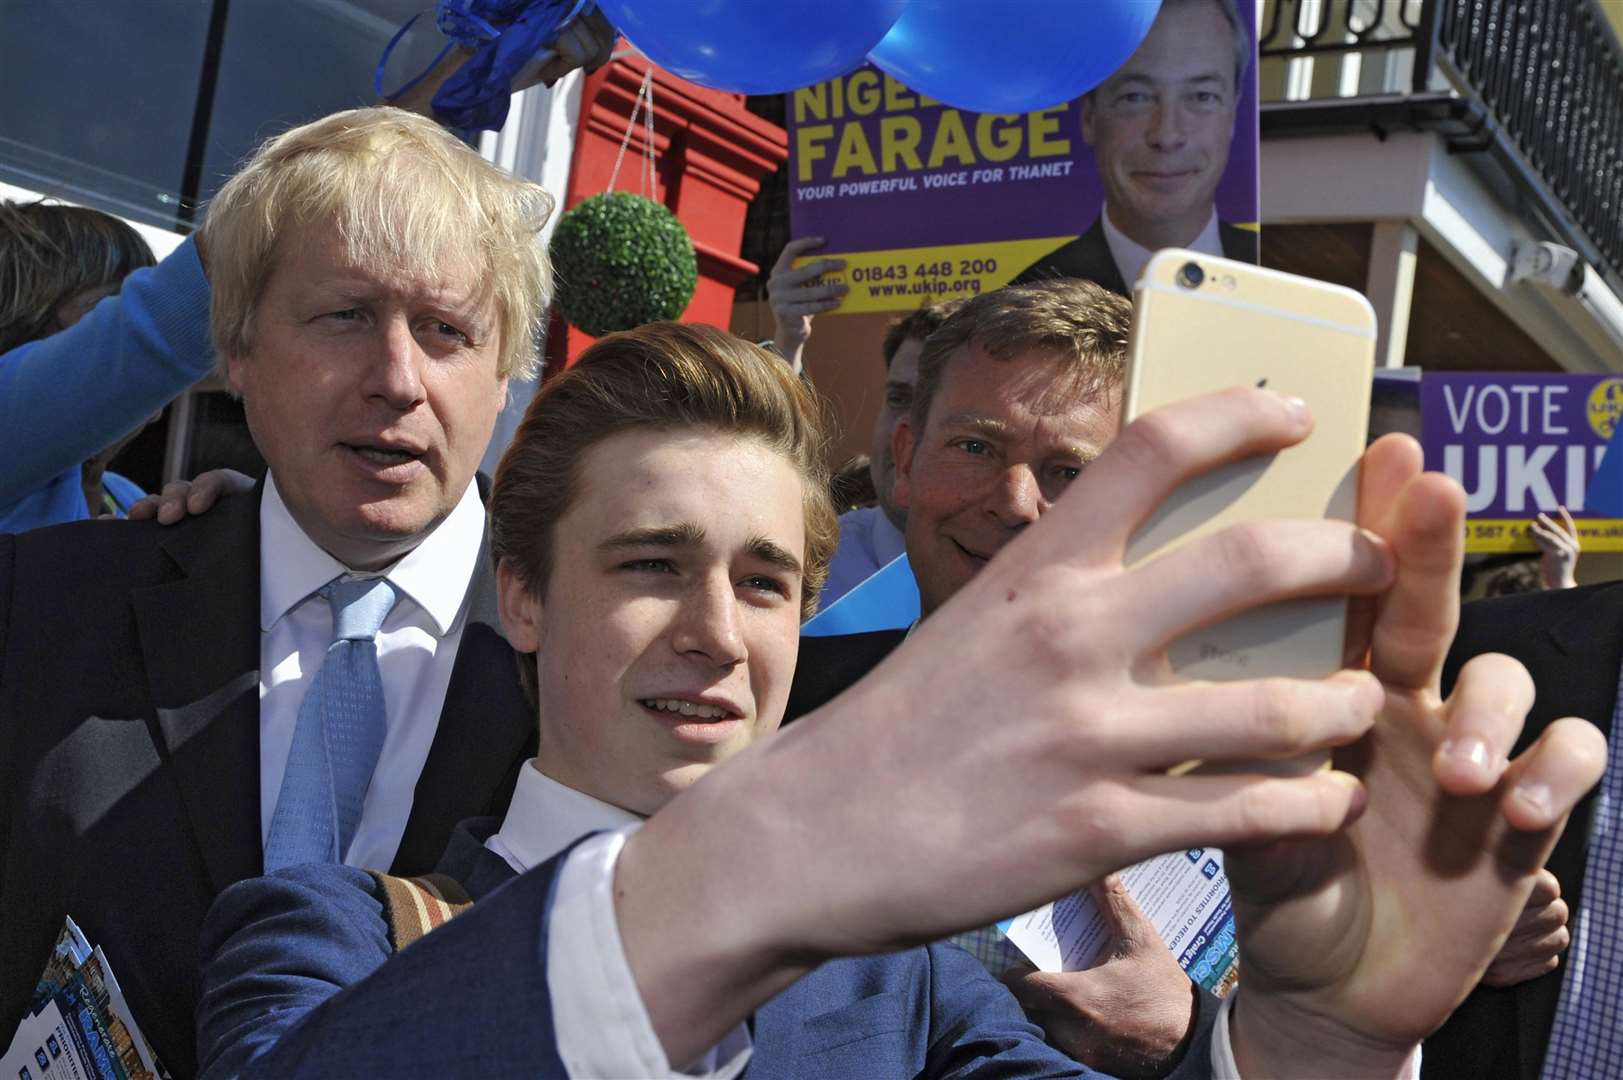 A school pupil gets a selfie with Boris Johnson and Craig Mackinlay on the 2015 General Election campaign trail